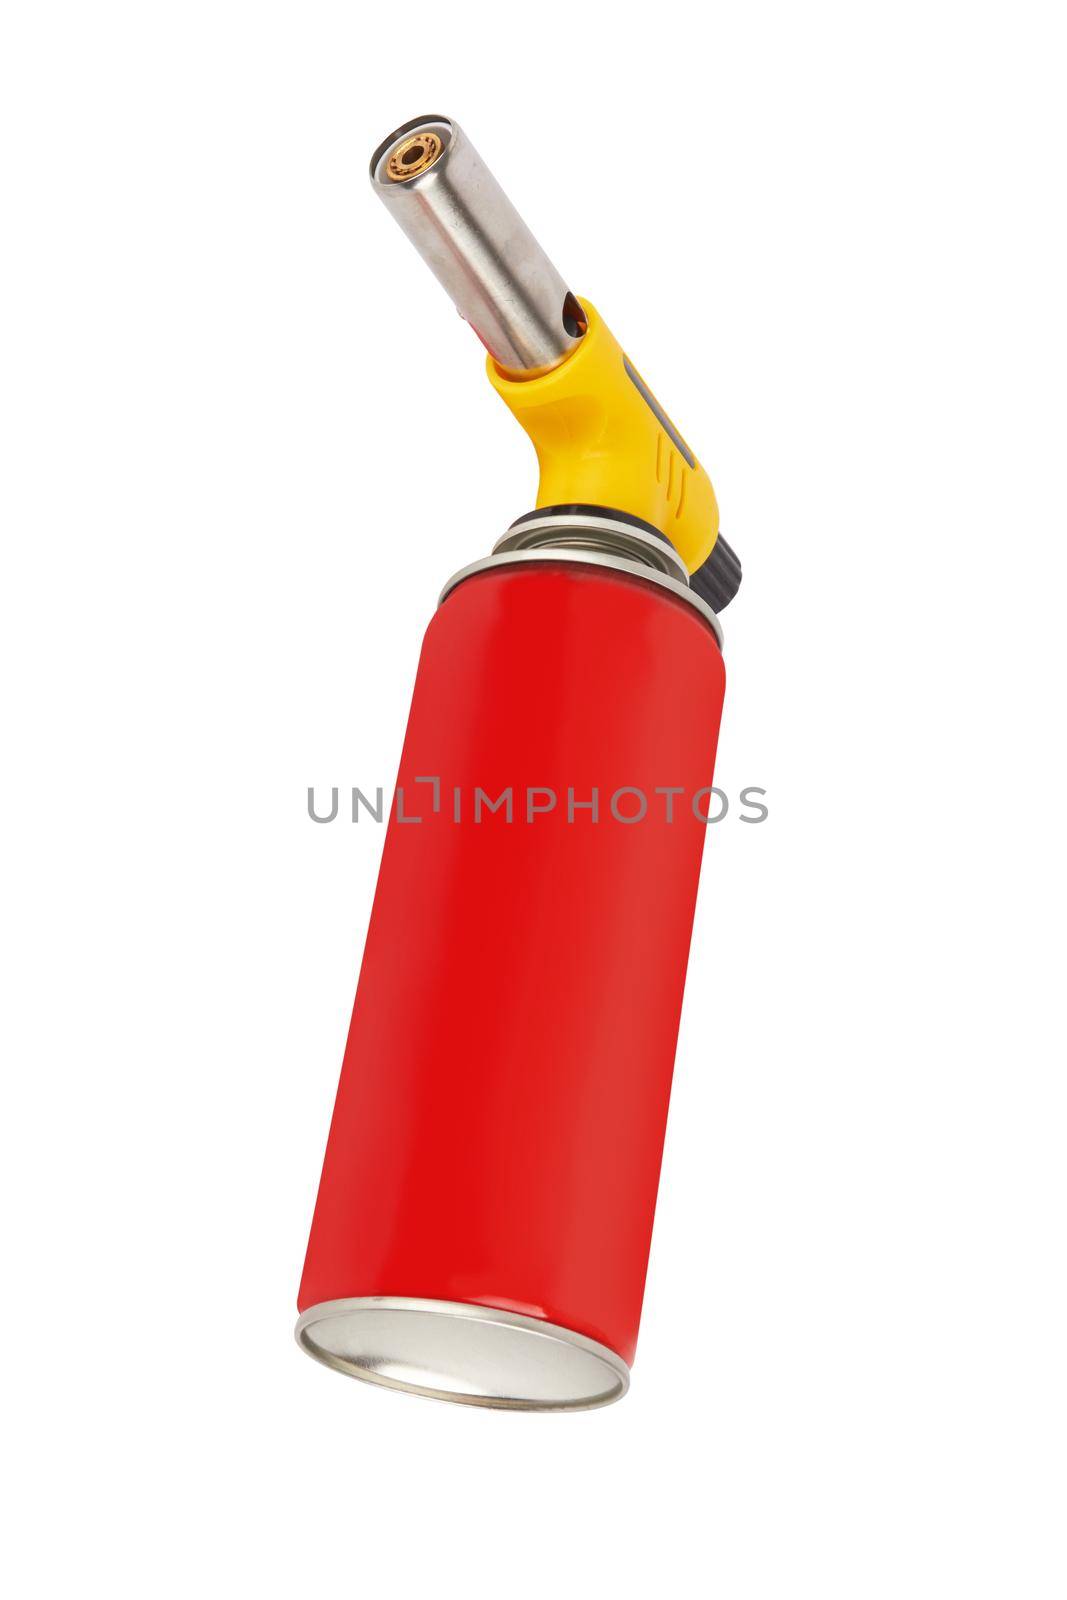 Gas can with manual torch burner by pioneer111